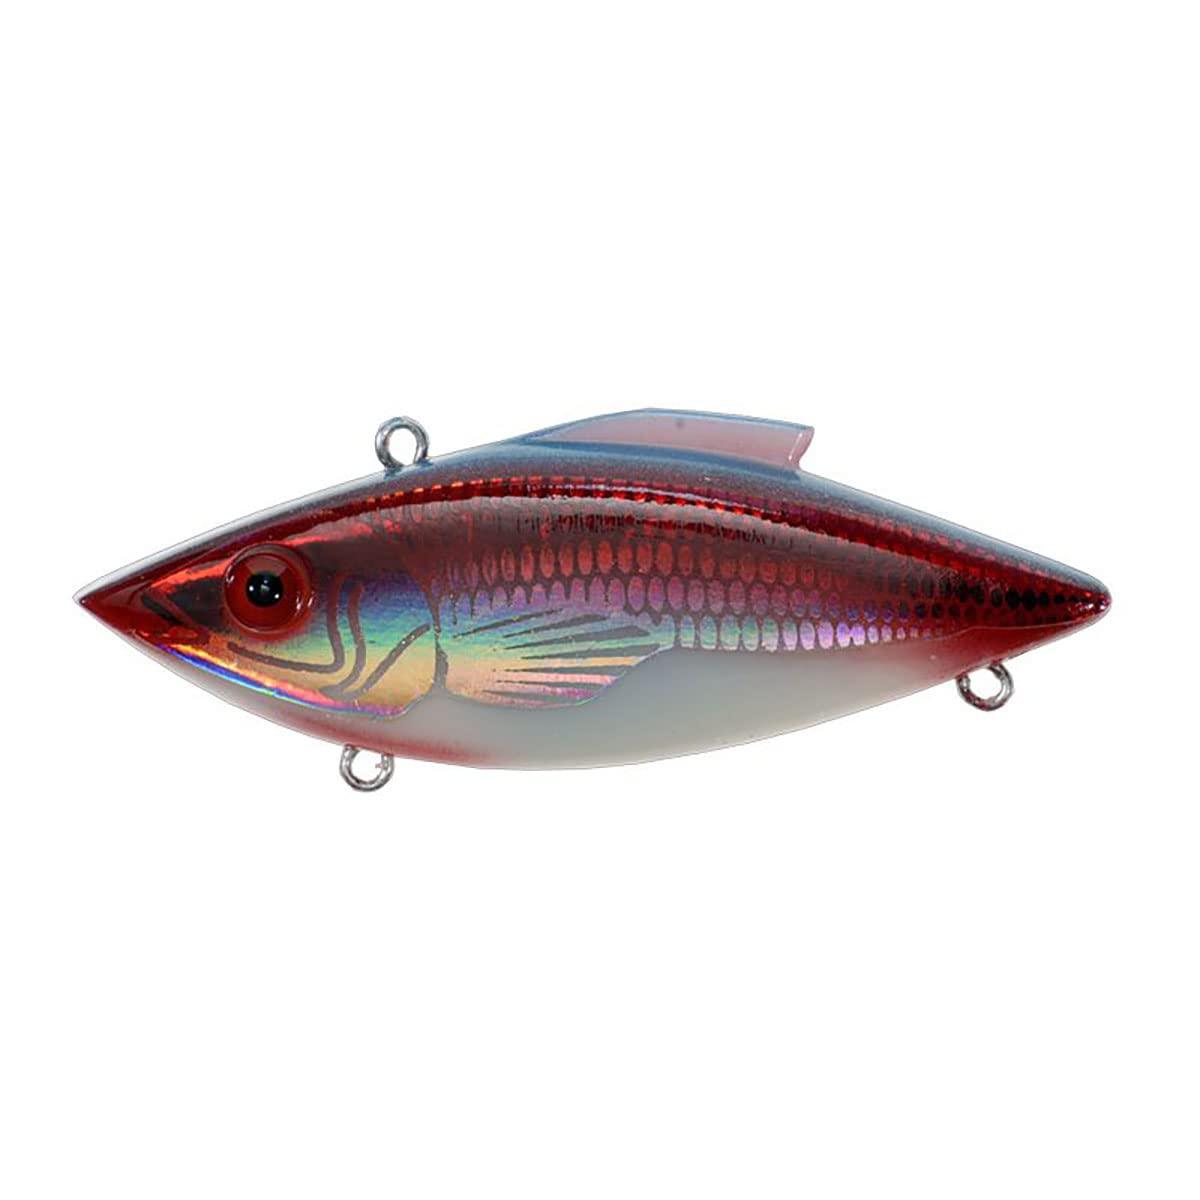 Rat-L-Trap Lures 1/2-Ounce Trap (Blood Line Shad)